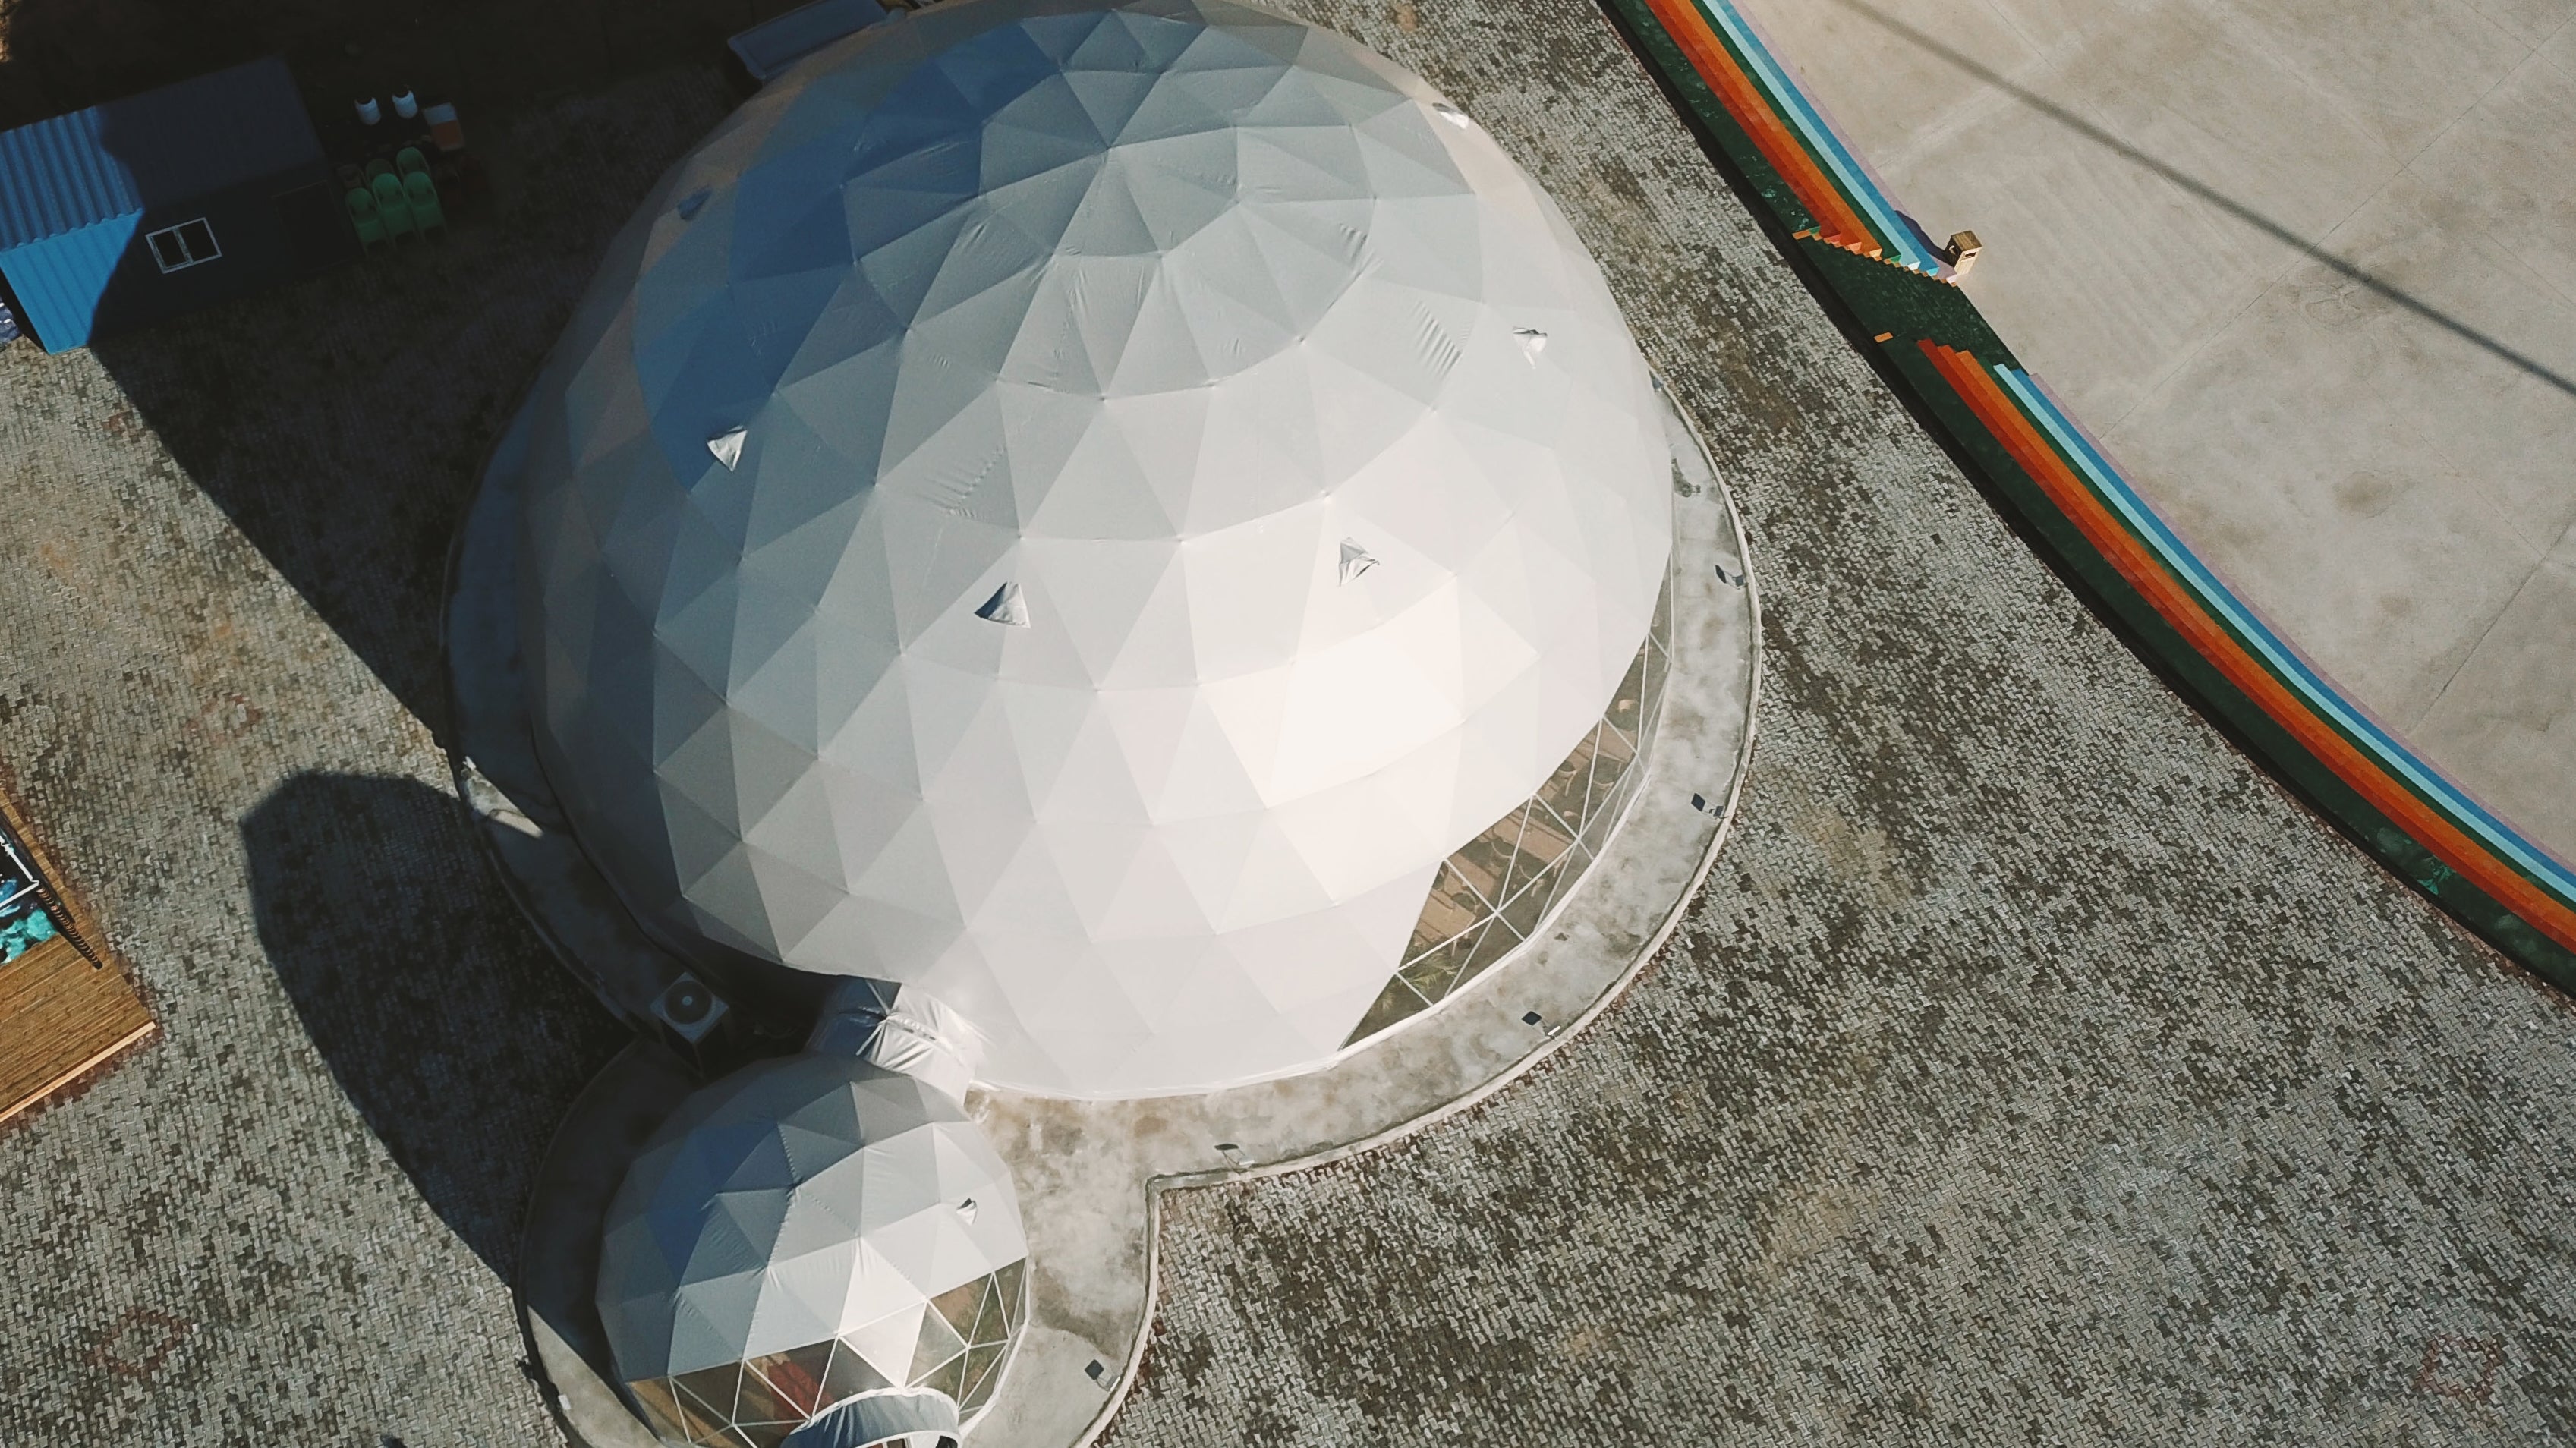 Commercial giant geodesic dome for event / expo / wedding / bar / rest –  landscamper